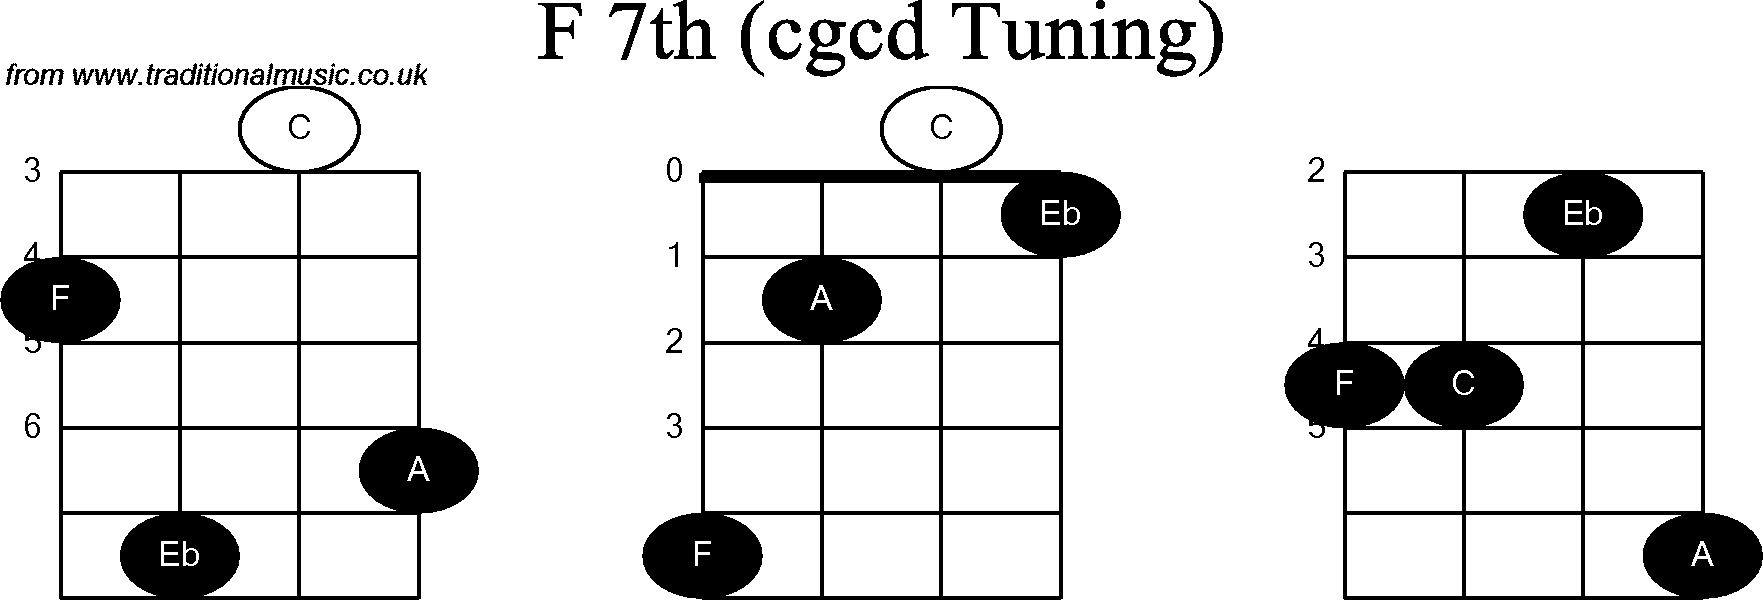 Chord diagrams for Banjo(Double C) F7th